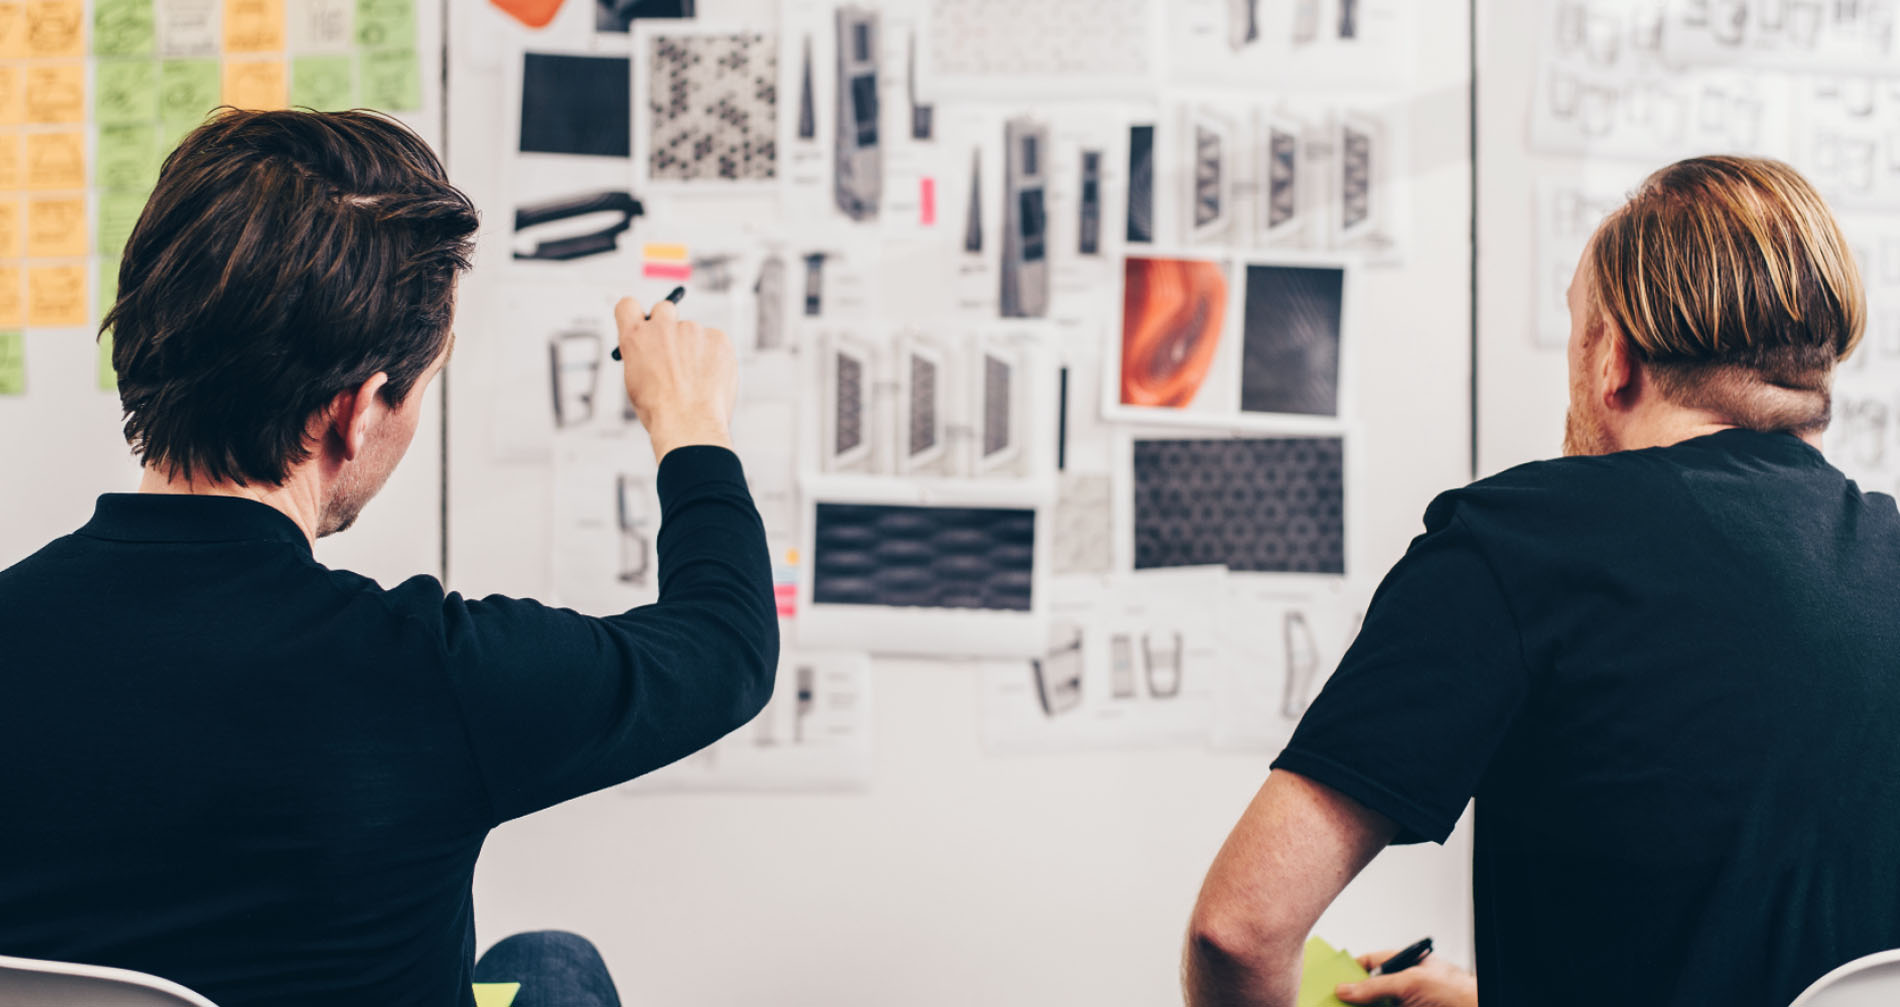 How A Product Design Agency Can Help Startups Gain Competitive Advantage